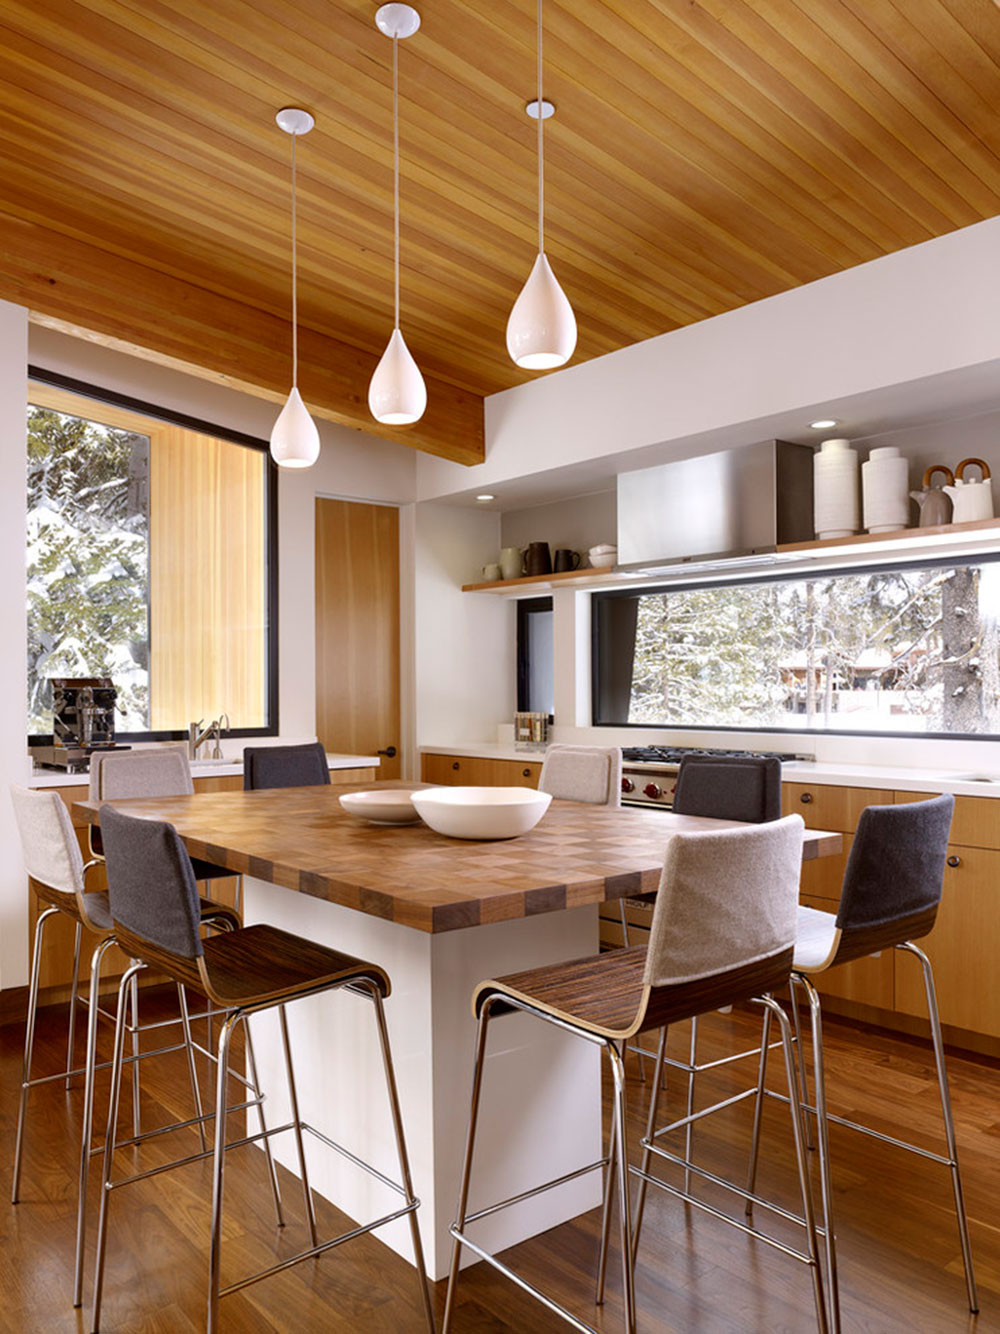 Kitchen Table Bench Seats That Gather The Entire Family